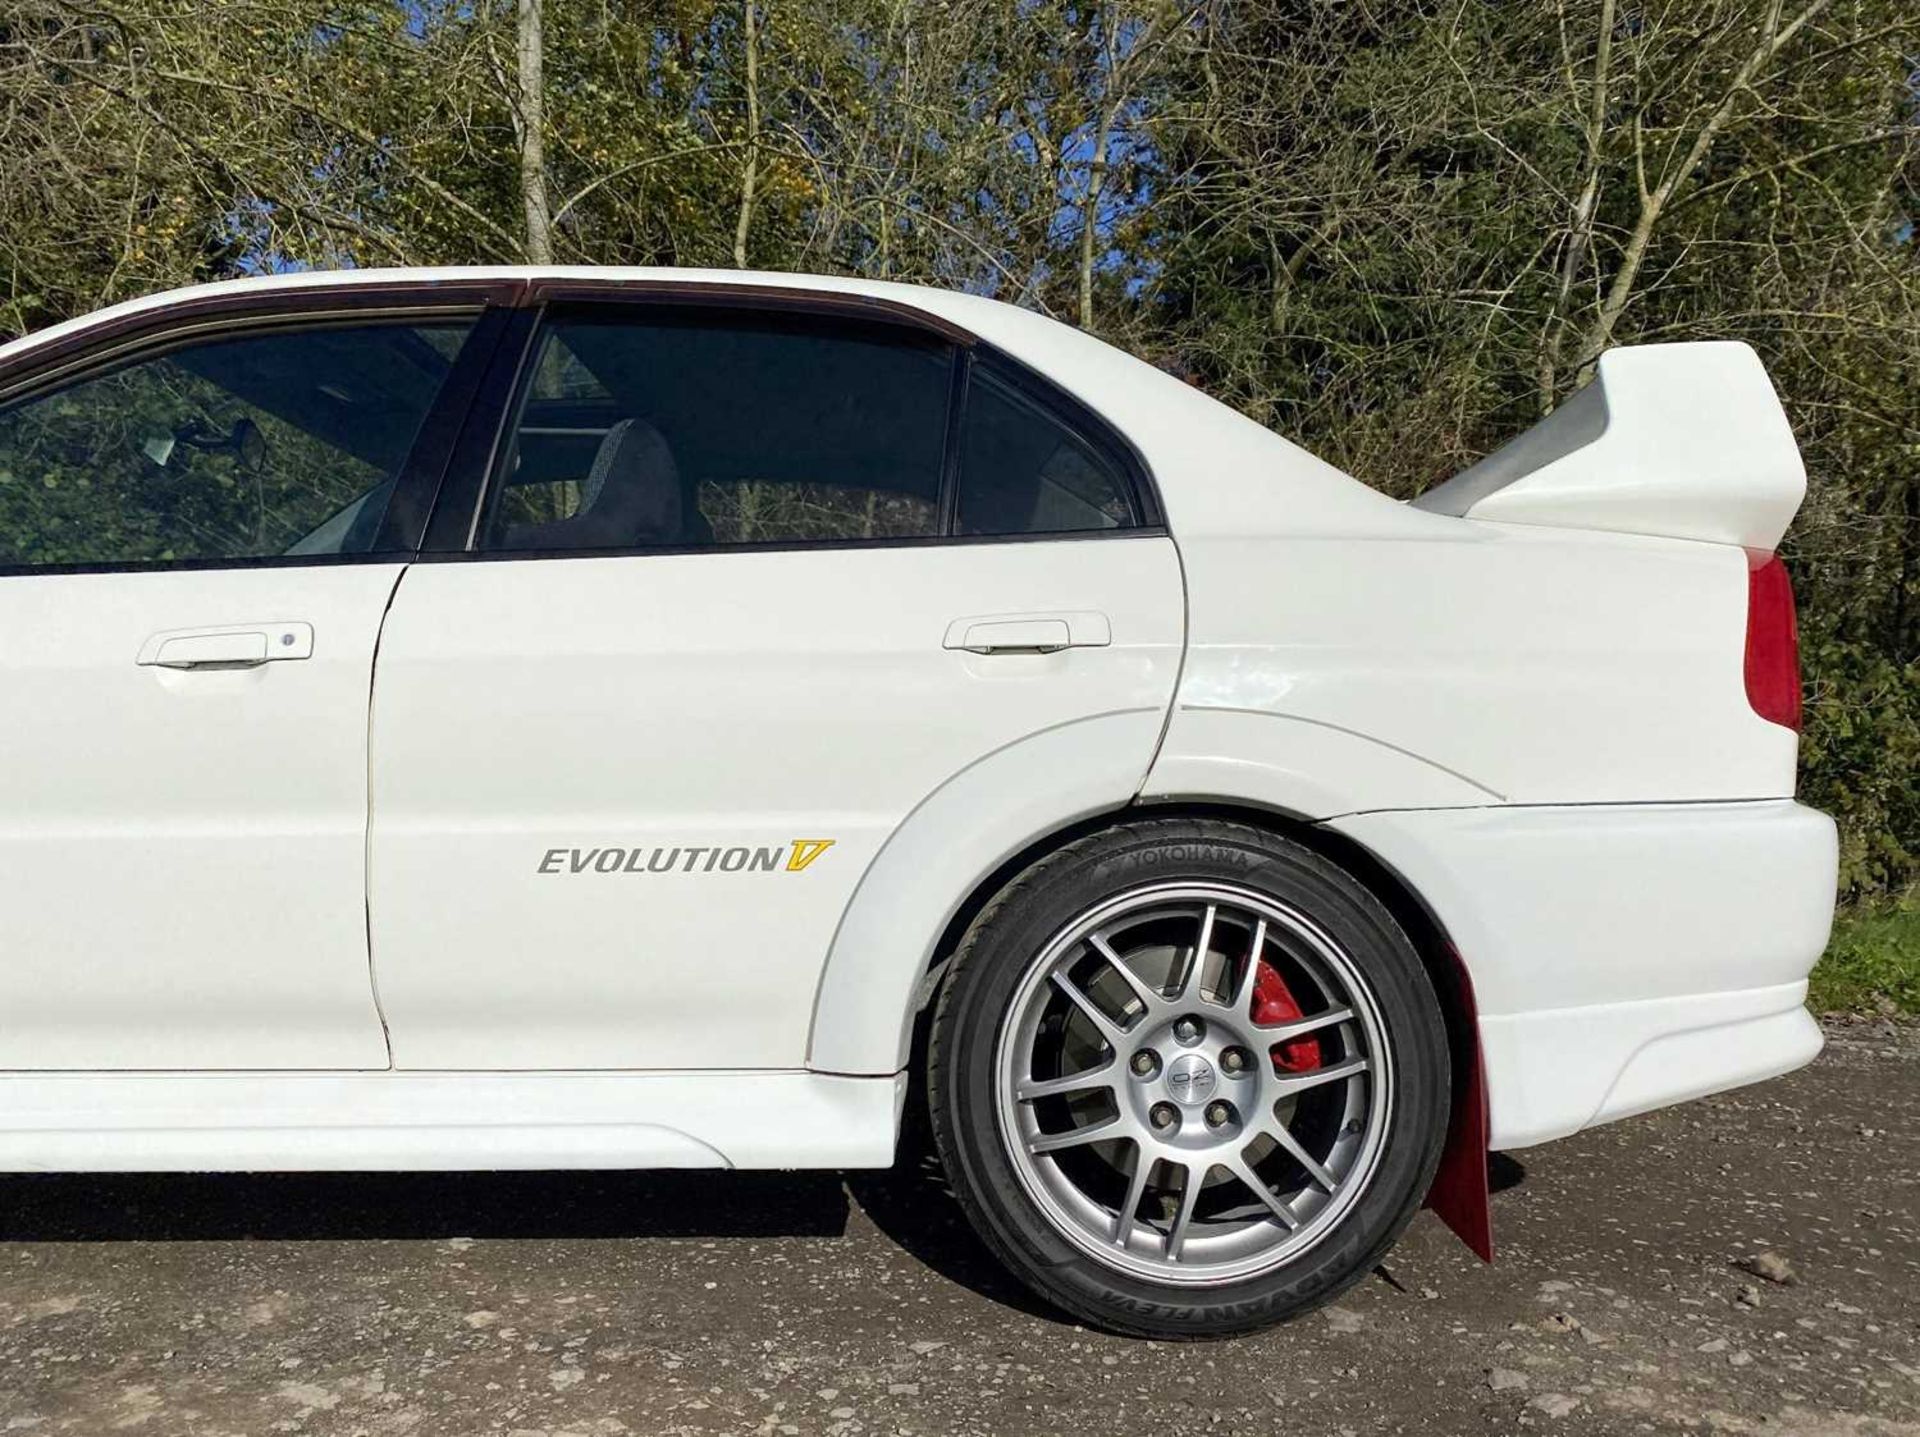 1998 Mitsubishi Lancer Evolution V GSR One UK keeper since being imported two years ago - Image 66 of 100